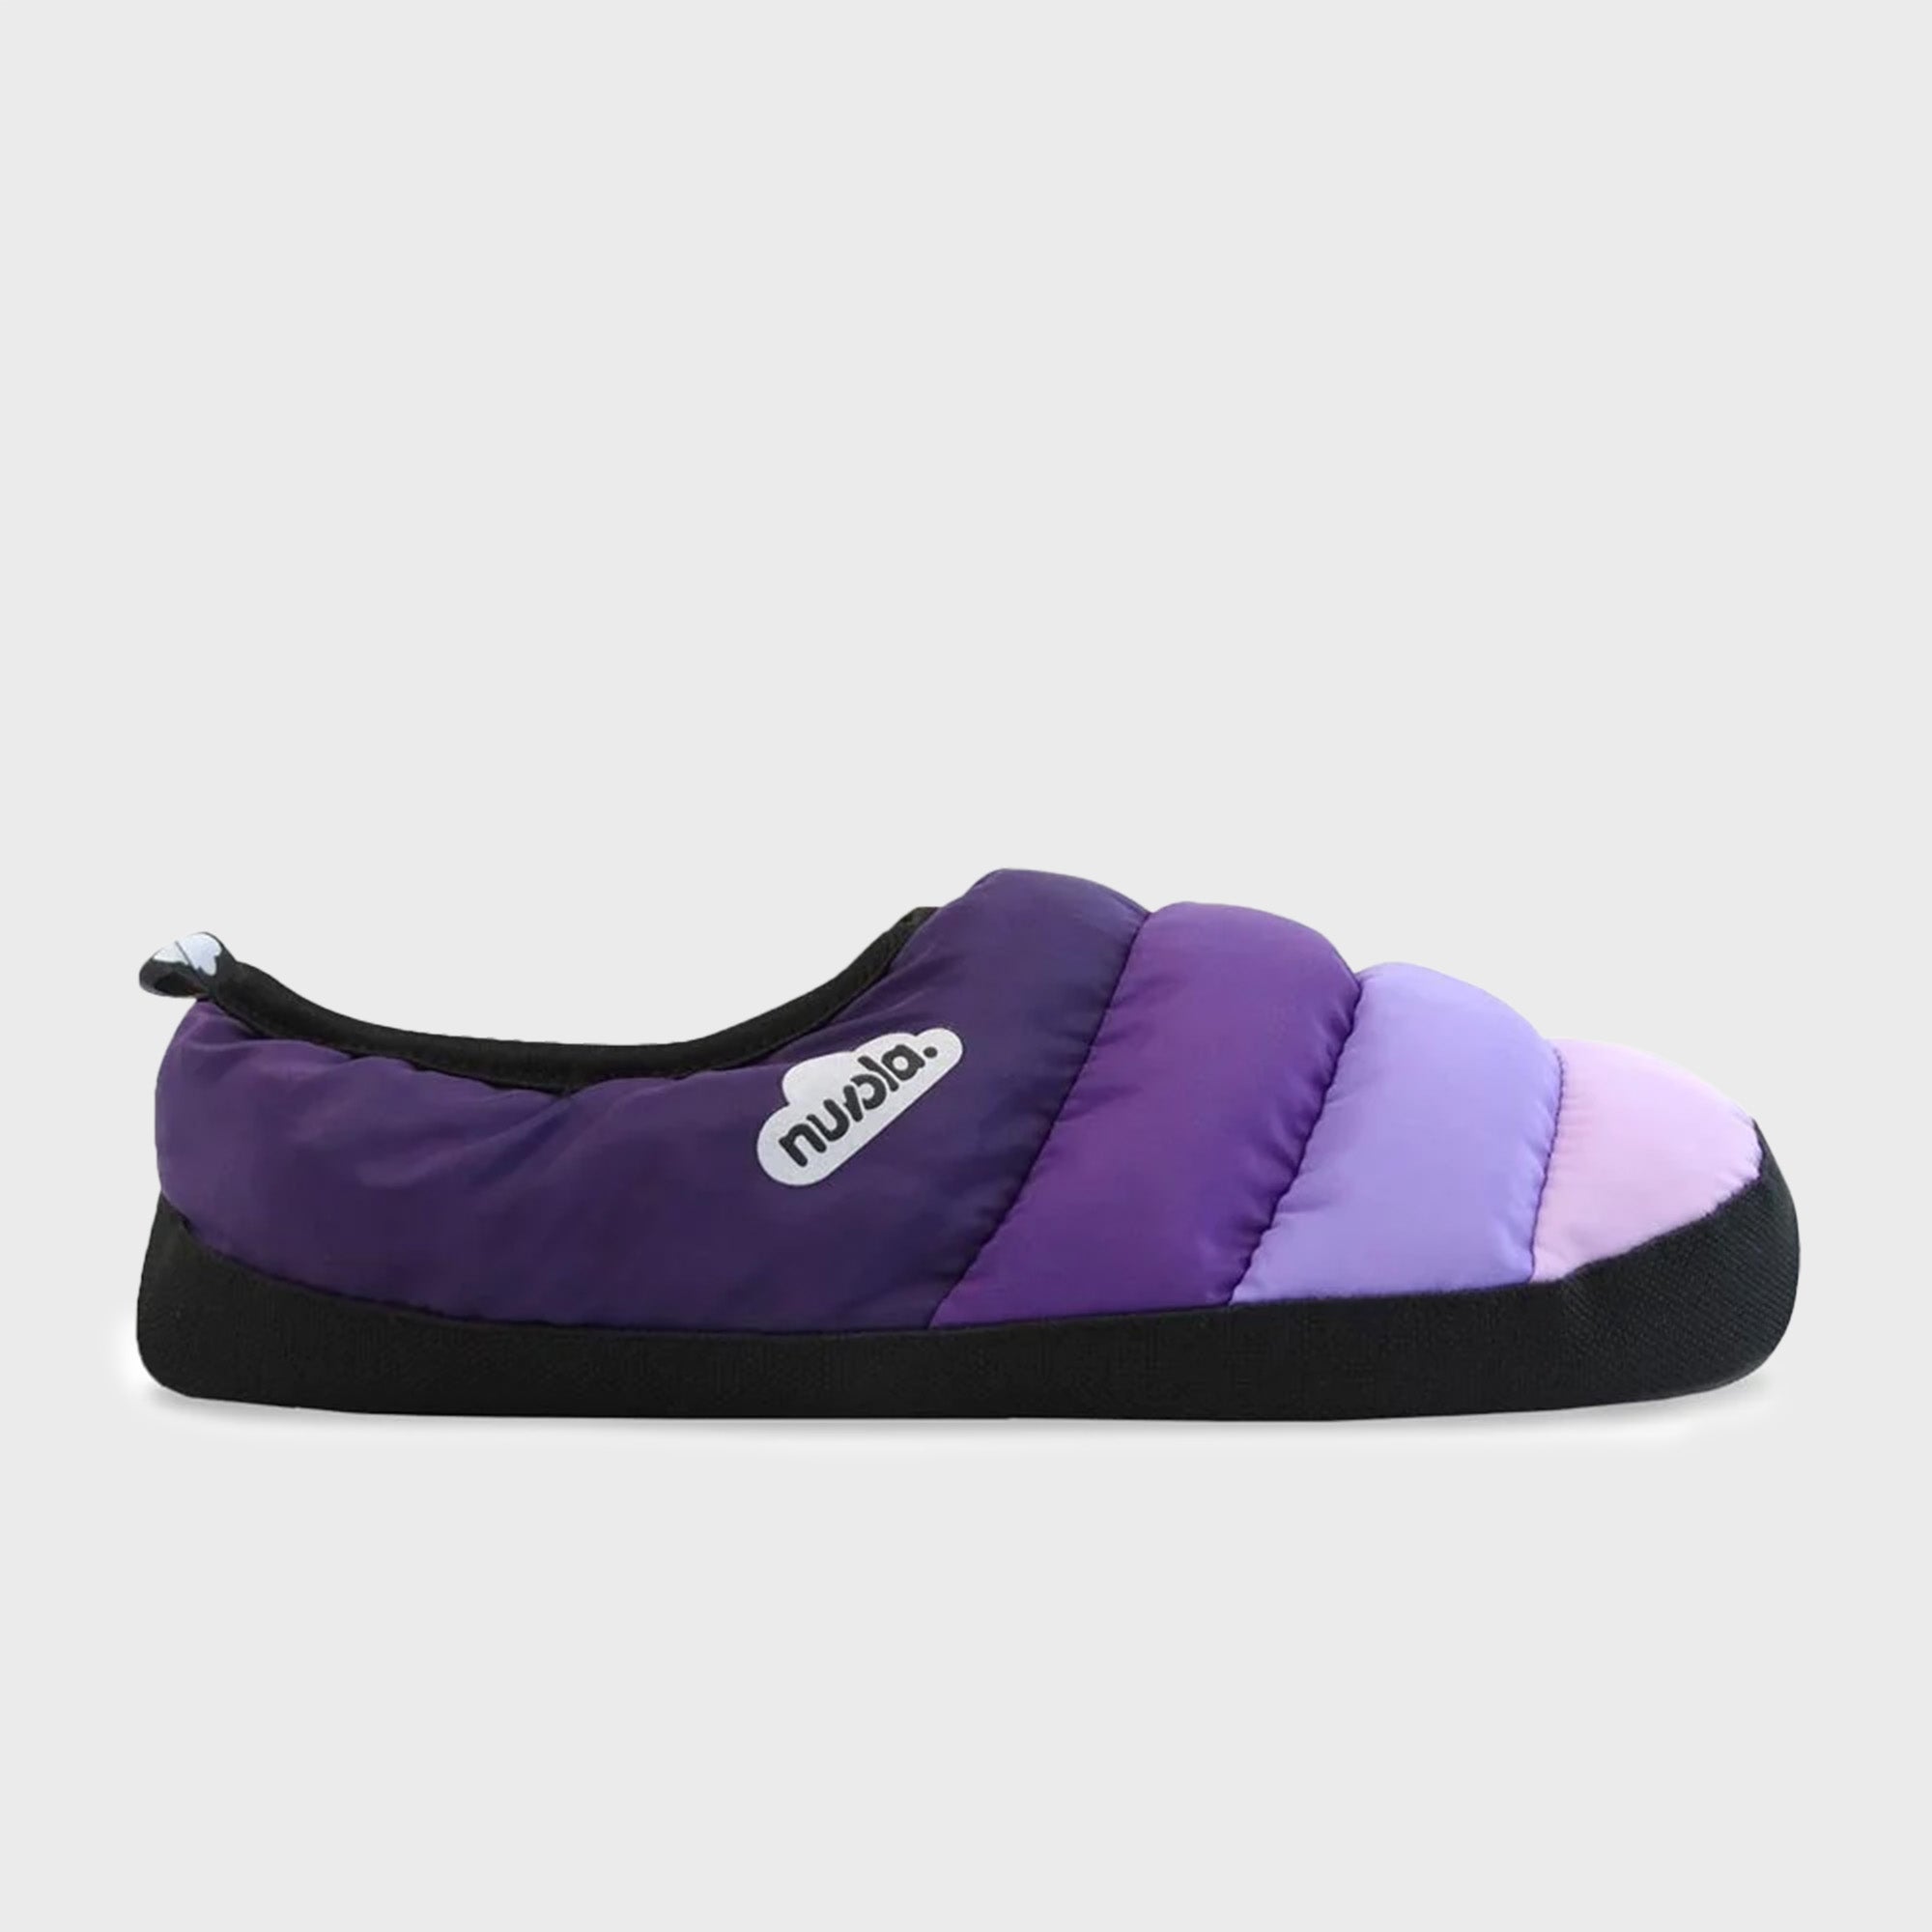 Nuvola Classic Colors Slippers in Purple CNCLACLRS21 FROM EIGHTYWINGOLD - OFFICIAL BRAND PARTNER